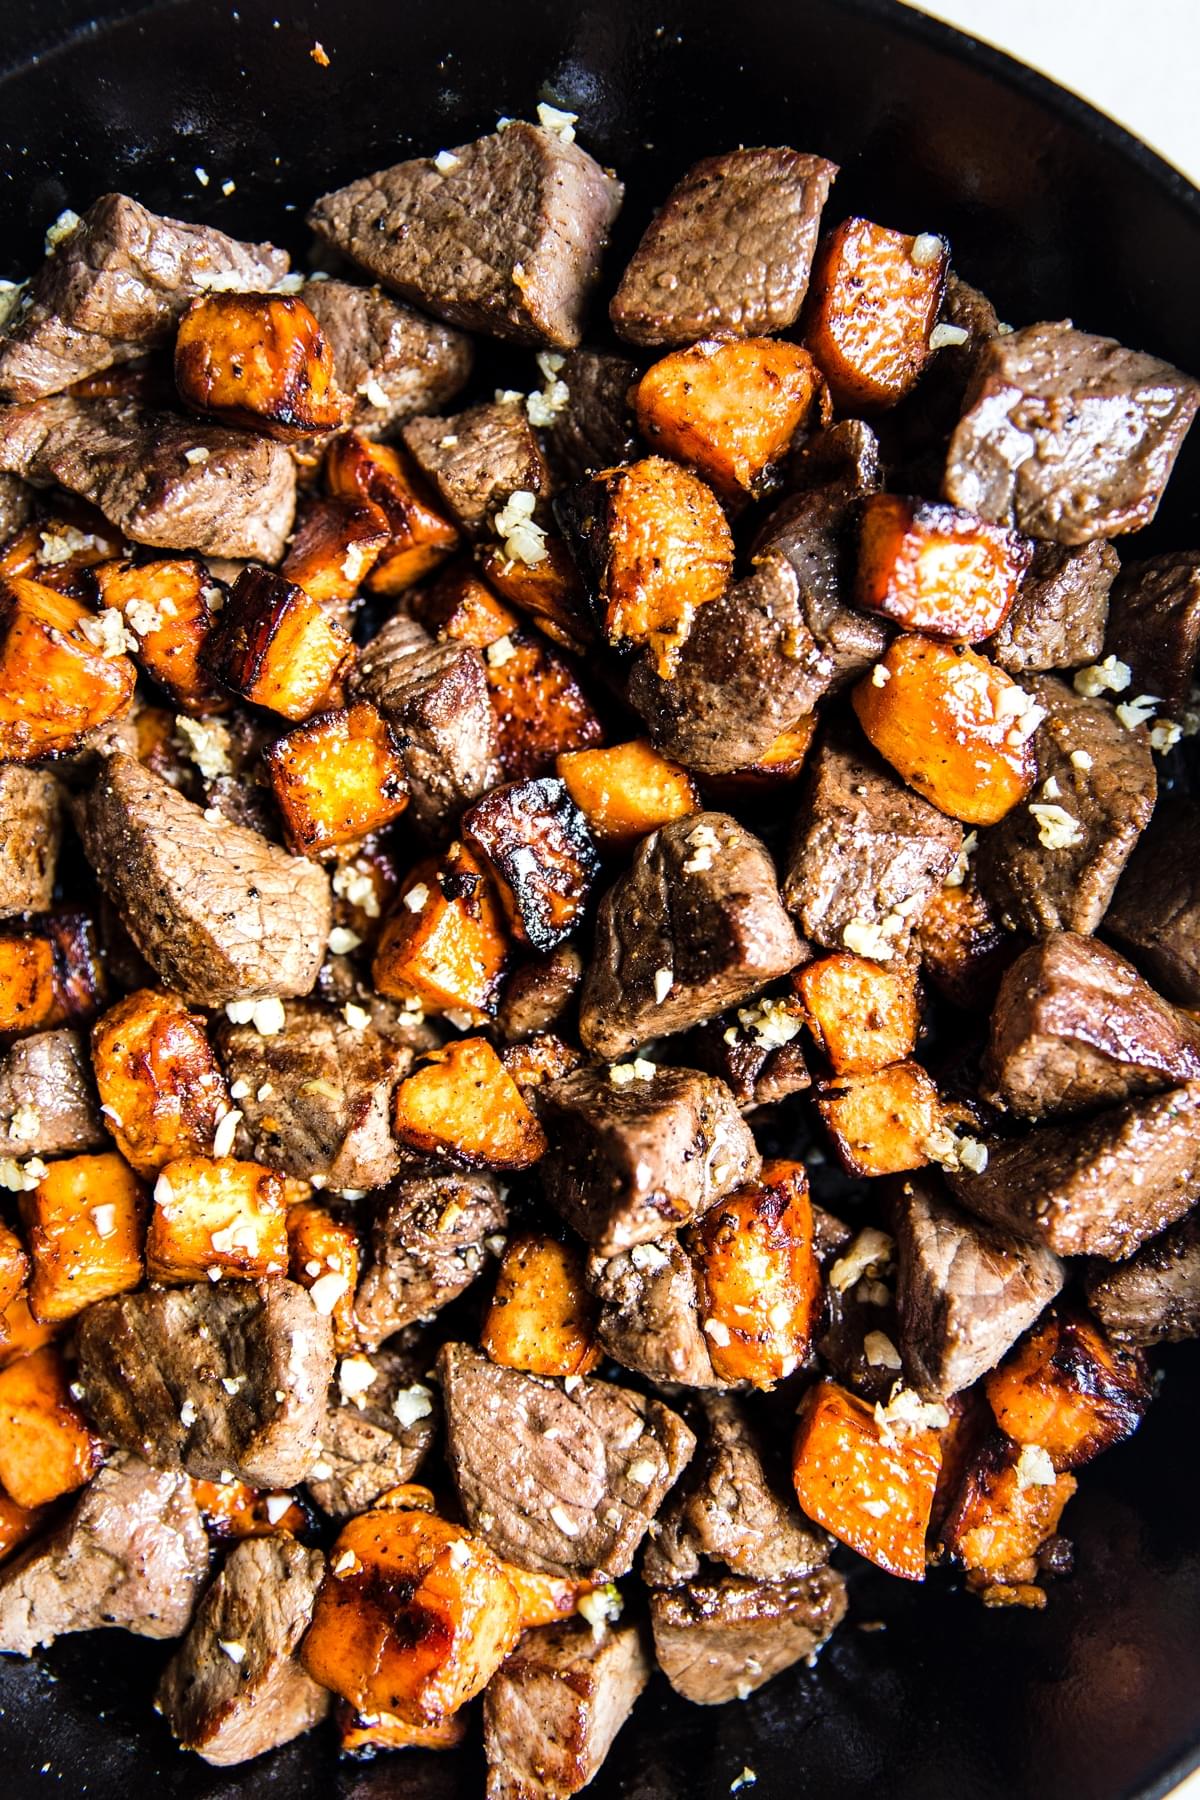 Garlic steak bites with sweet potatoes in a cast iron pan